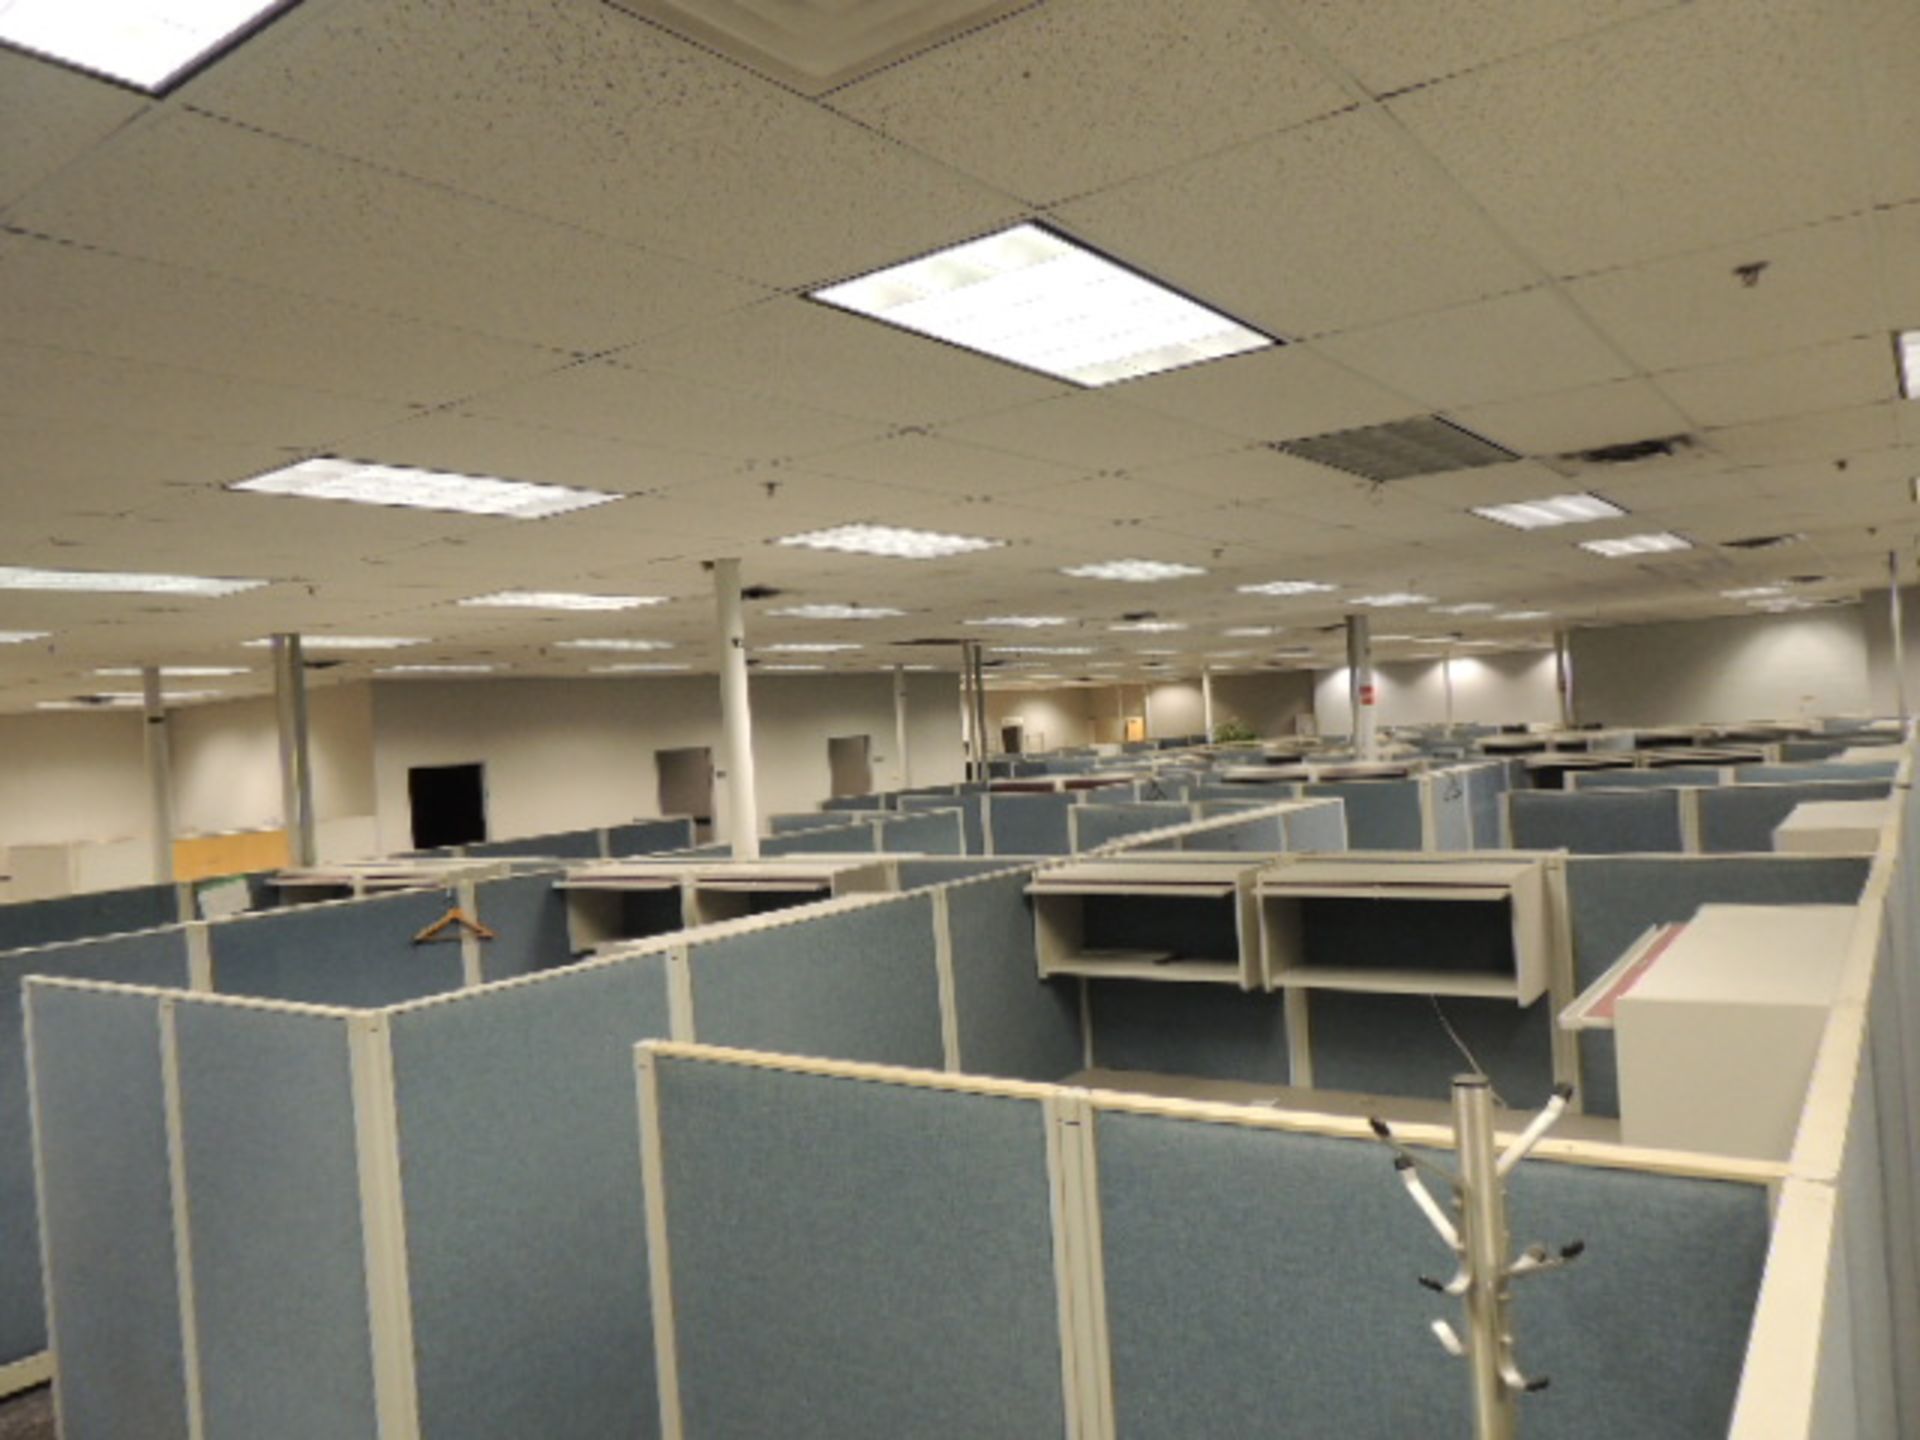 Office Cubicles & Contents. Lot: (3) offices and contents, (4) cubicles 10'x15'x8' with desks and